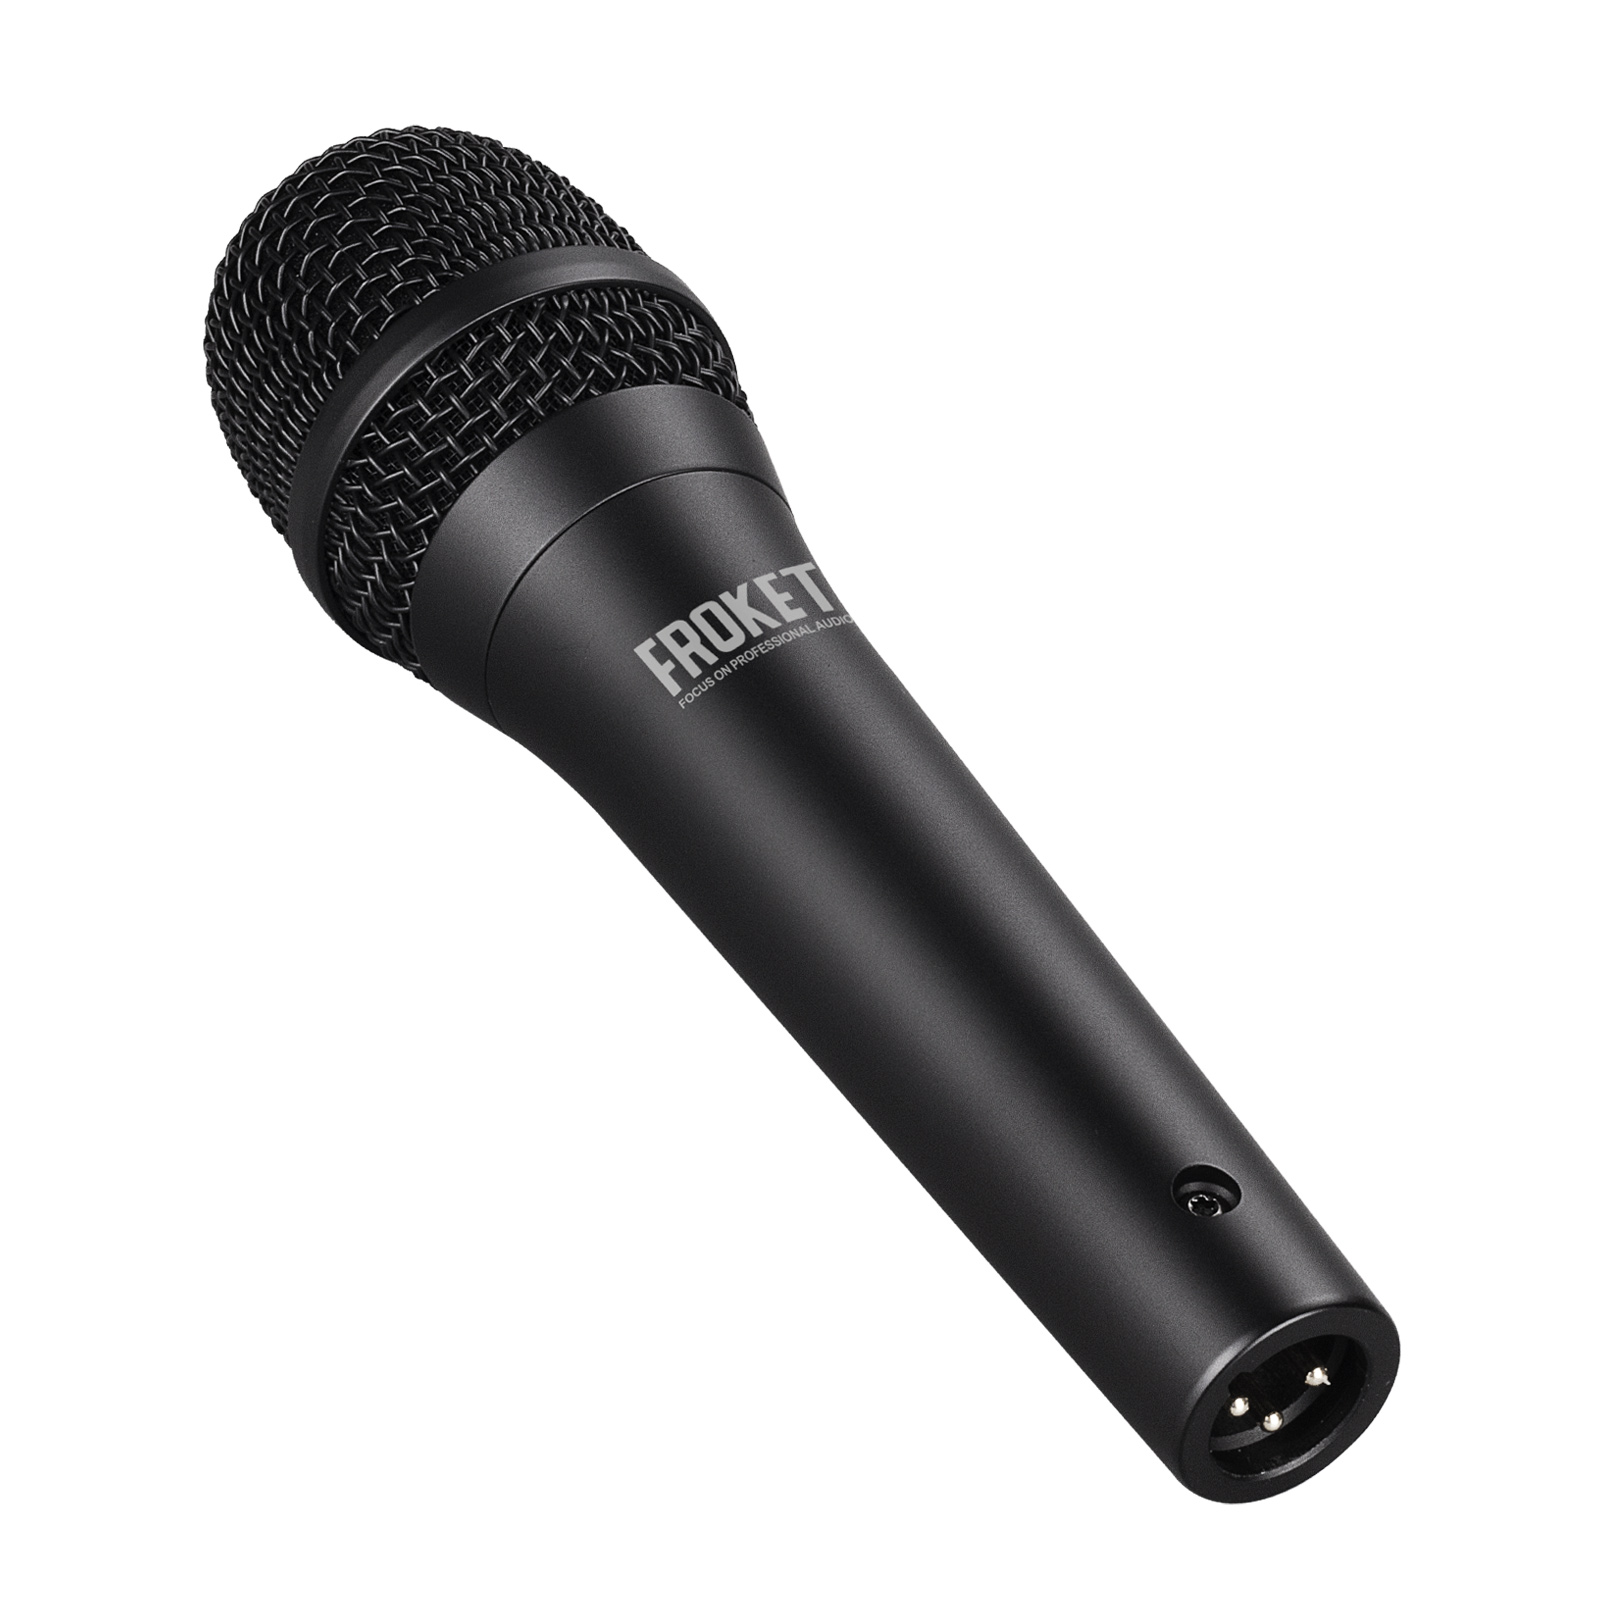 DE-90 Professional Wired Microphone